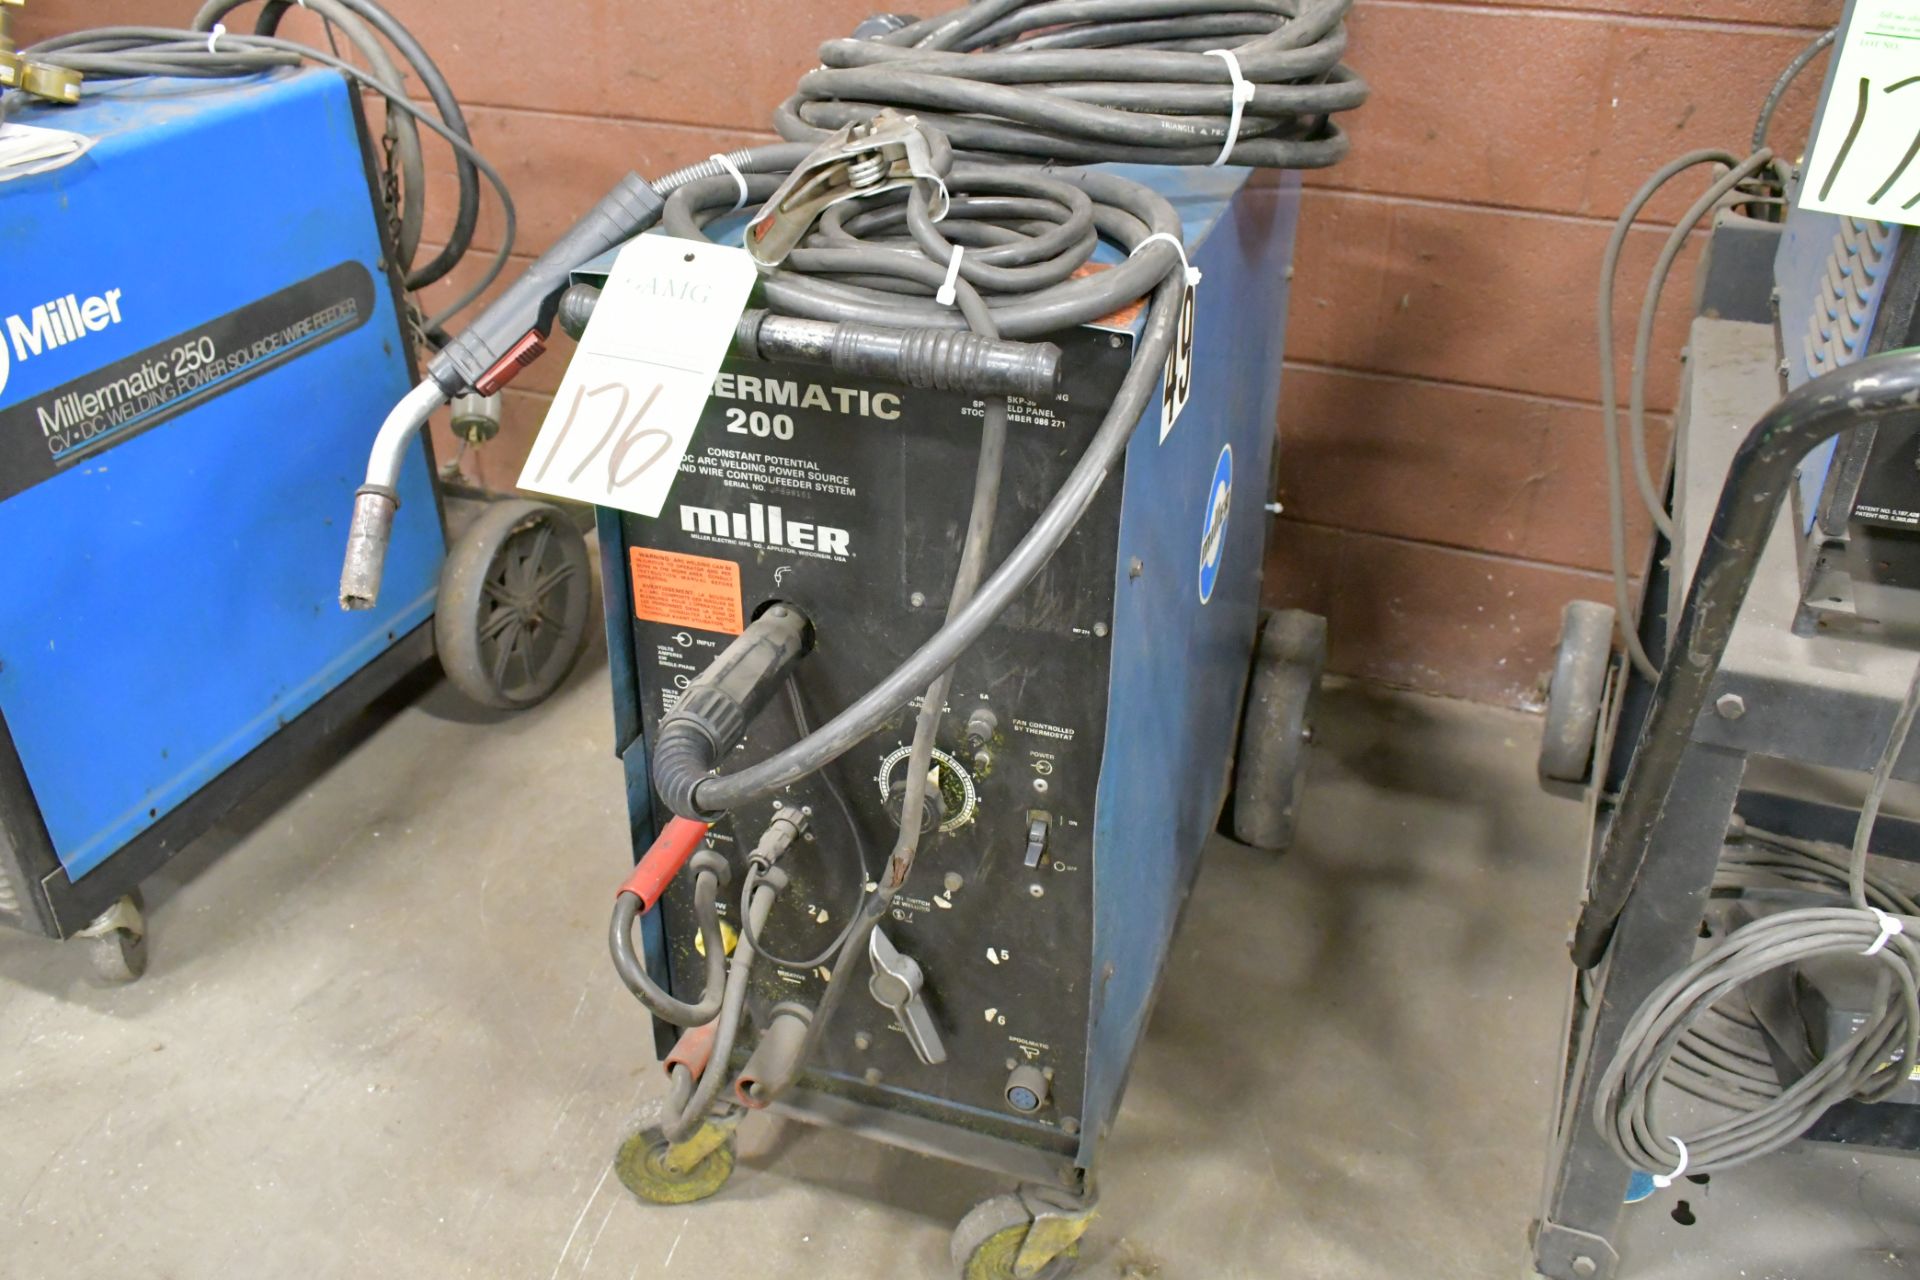 Miller Millermatic 200, 200-Amp Capacity CP DC Wire Feed Mig Welder, S/n JF896161, with Leads,